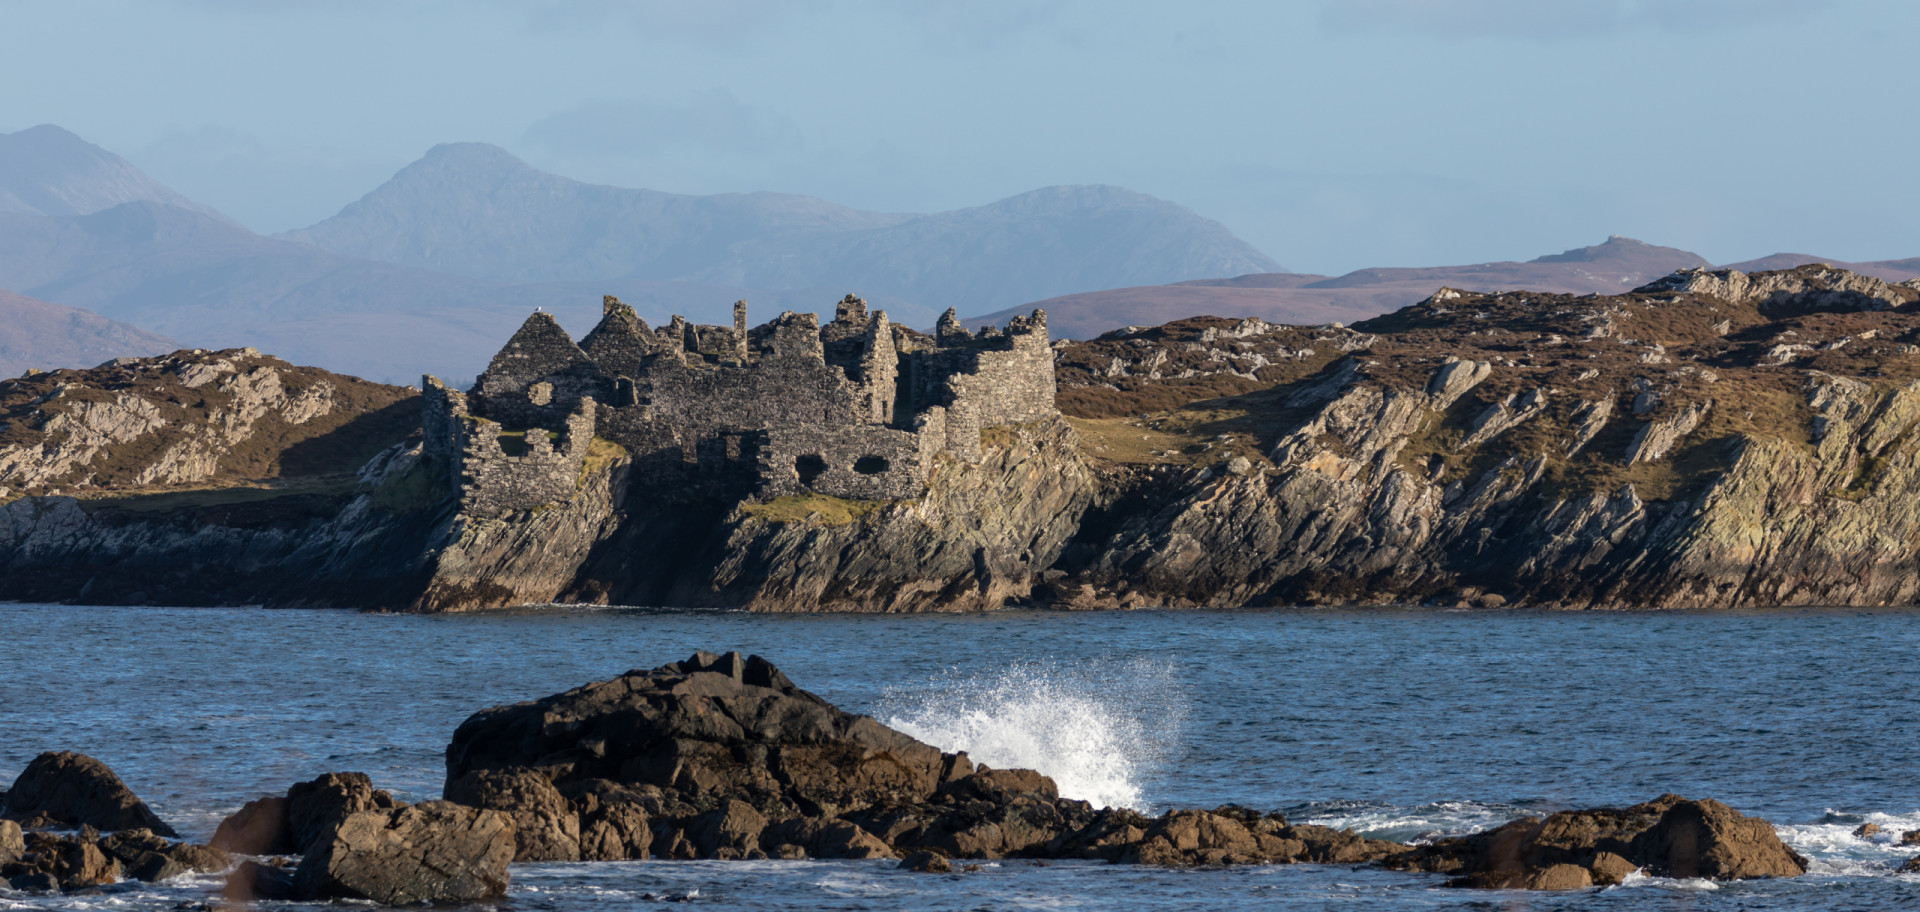 <p>Inishbofin, off the Galway coast, is believed to have been inhabited since 8000-4000 BCE. Having been home to soldiers and pirates alike over the years, the island has a rich history.</p><p><a href="https://www.msn.com/en-au/community/channel/vid-7xx8mnucu55yw63we9va2gwr7uihbxwc68fxqp25x6tg4ftibpra?cvid=94631541bc0f4f89bfd59158d696ad7e">Follow us and access great exclusive content every day</a></p>